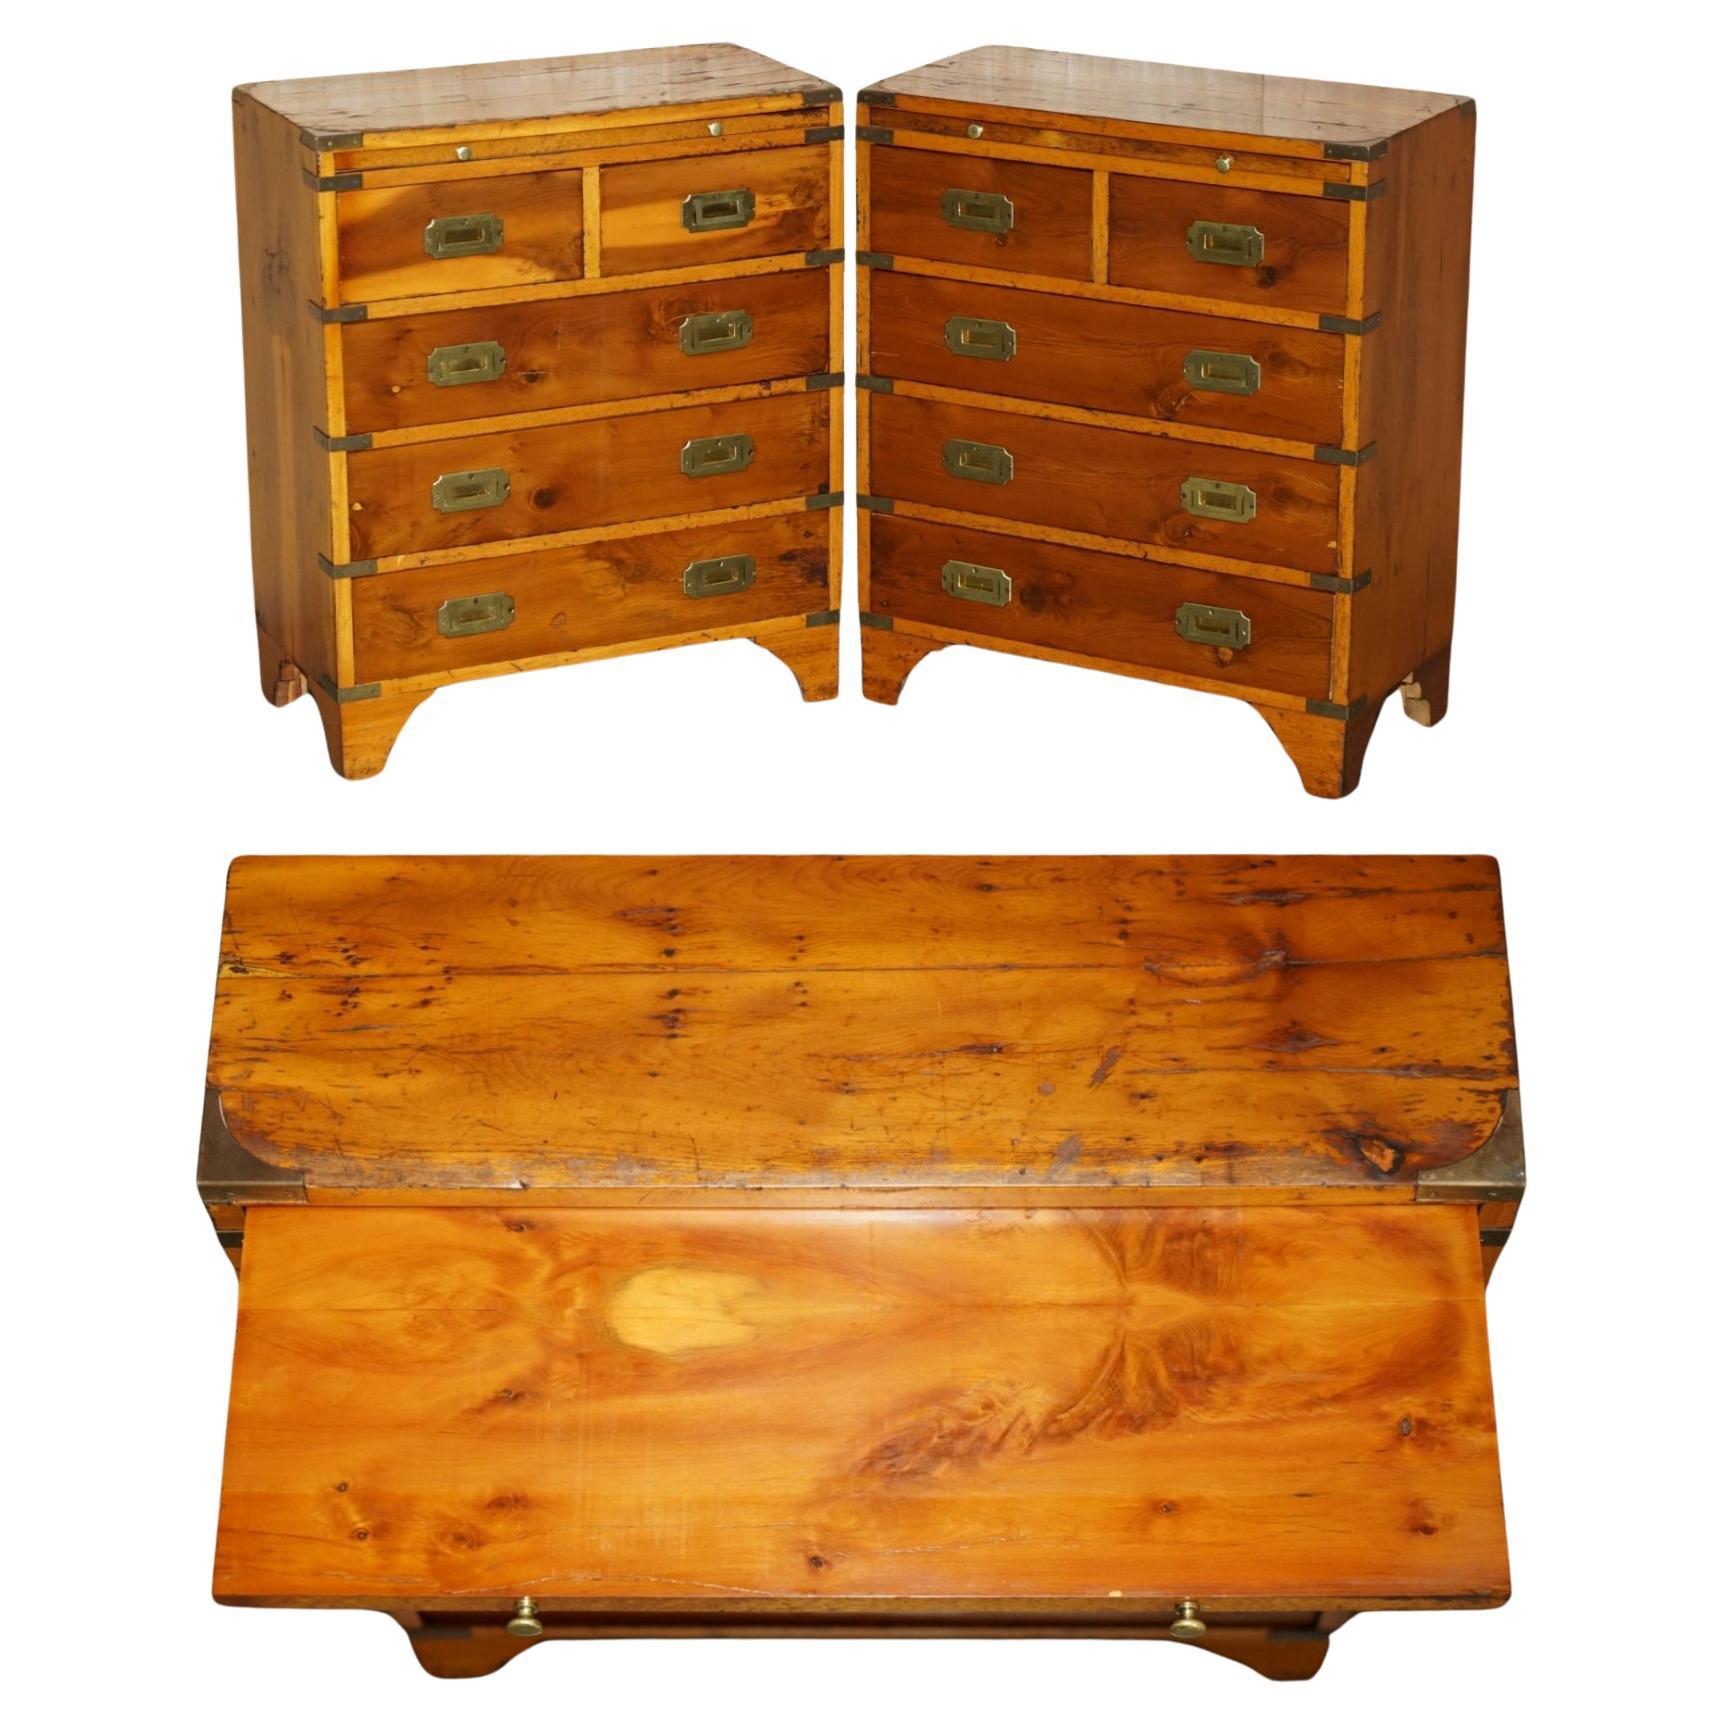 PAIR OF DISTRESSED MILITARY CAMPAIGN BURR YEW WOOD SIDE TABLES WiTH DRAWERS TRAY For Sale